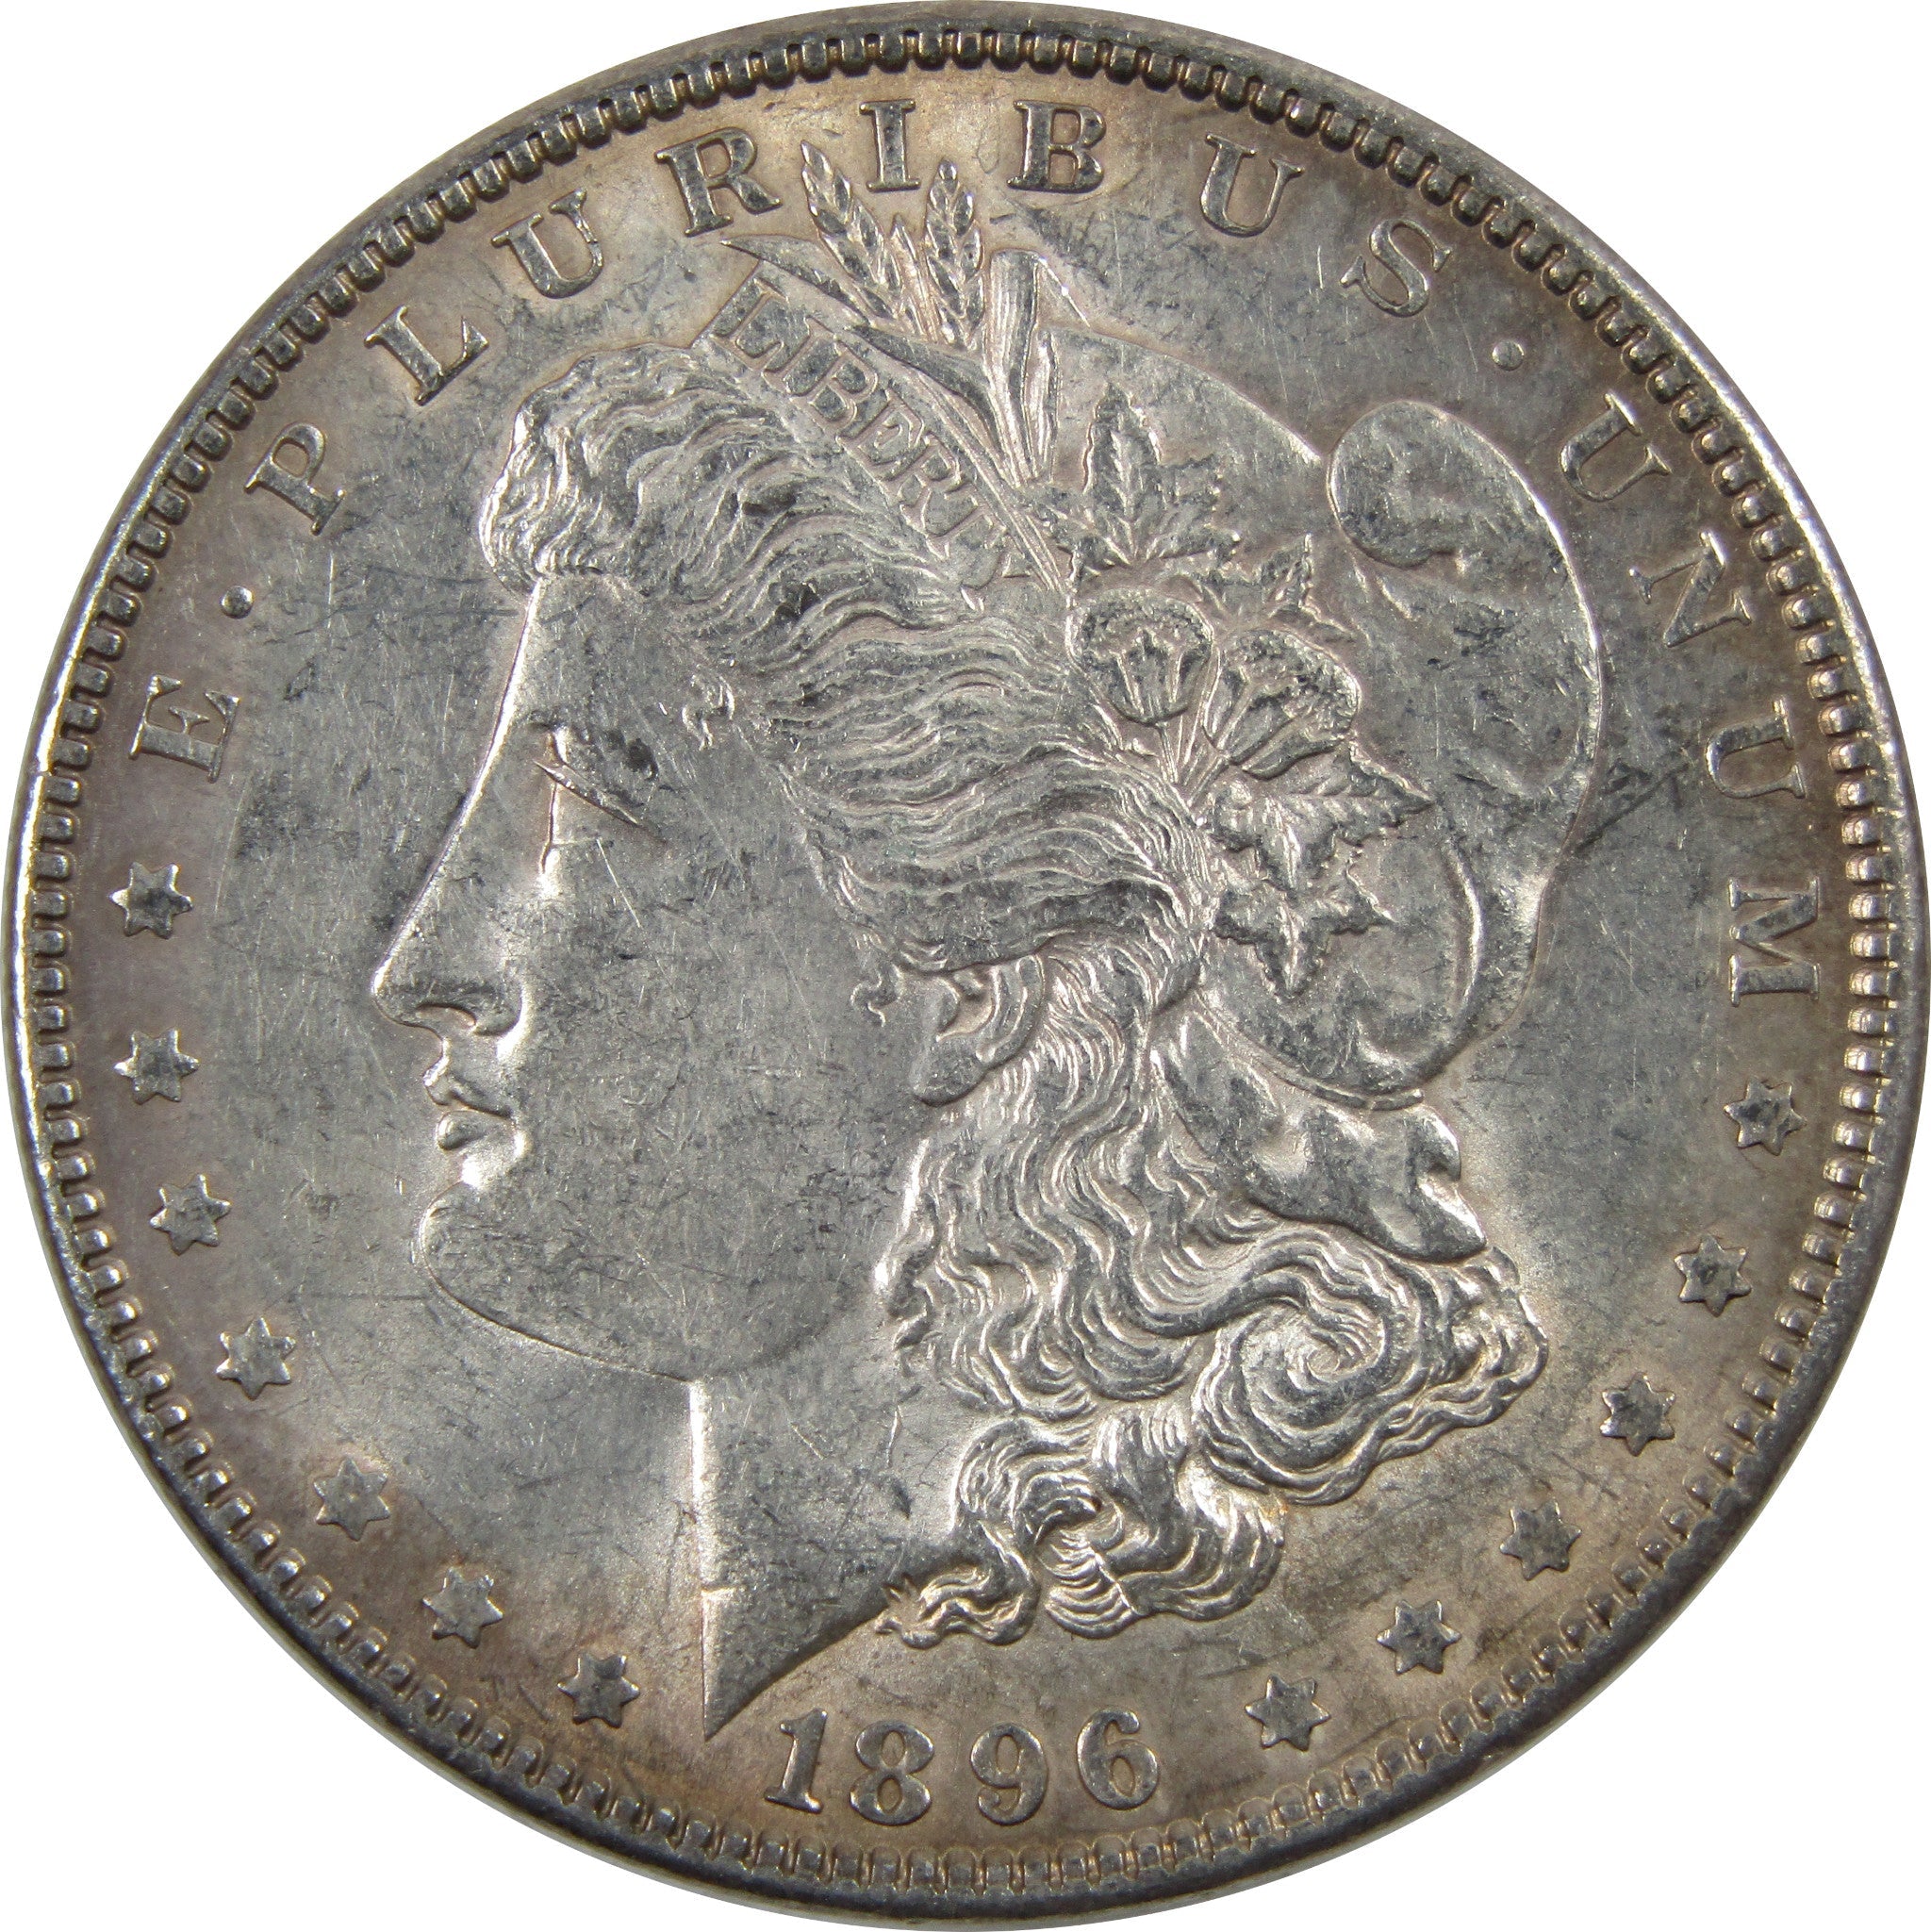 1896 Morgan Dollar AU About Uncirculated 90% Silver $1 Coin SKU:I5459 - Morgan coin - Morgan silver dollar - Morgan silver dollar for sale - Profile Coins &amp; Collectibles